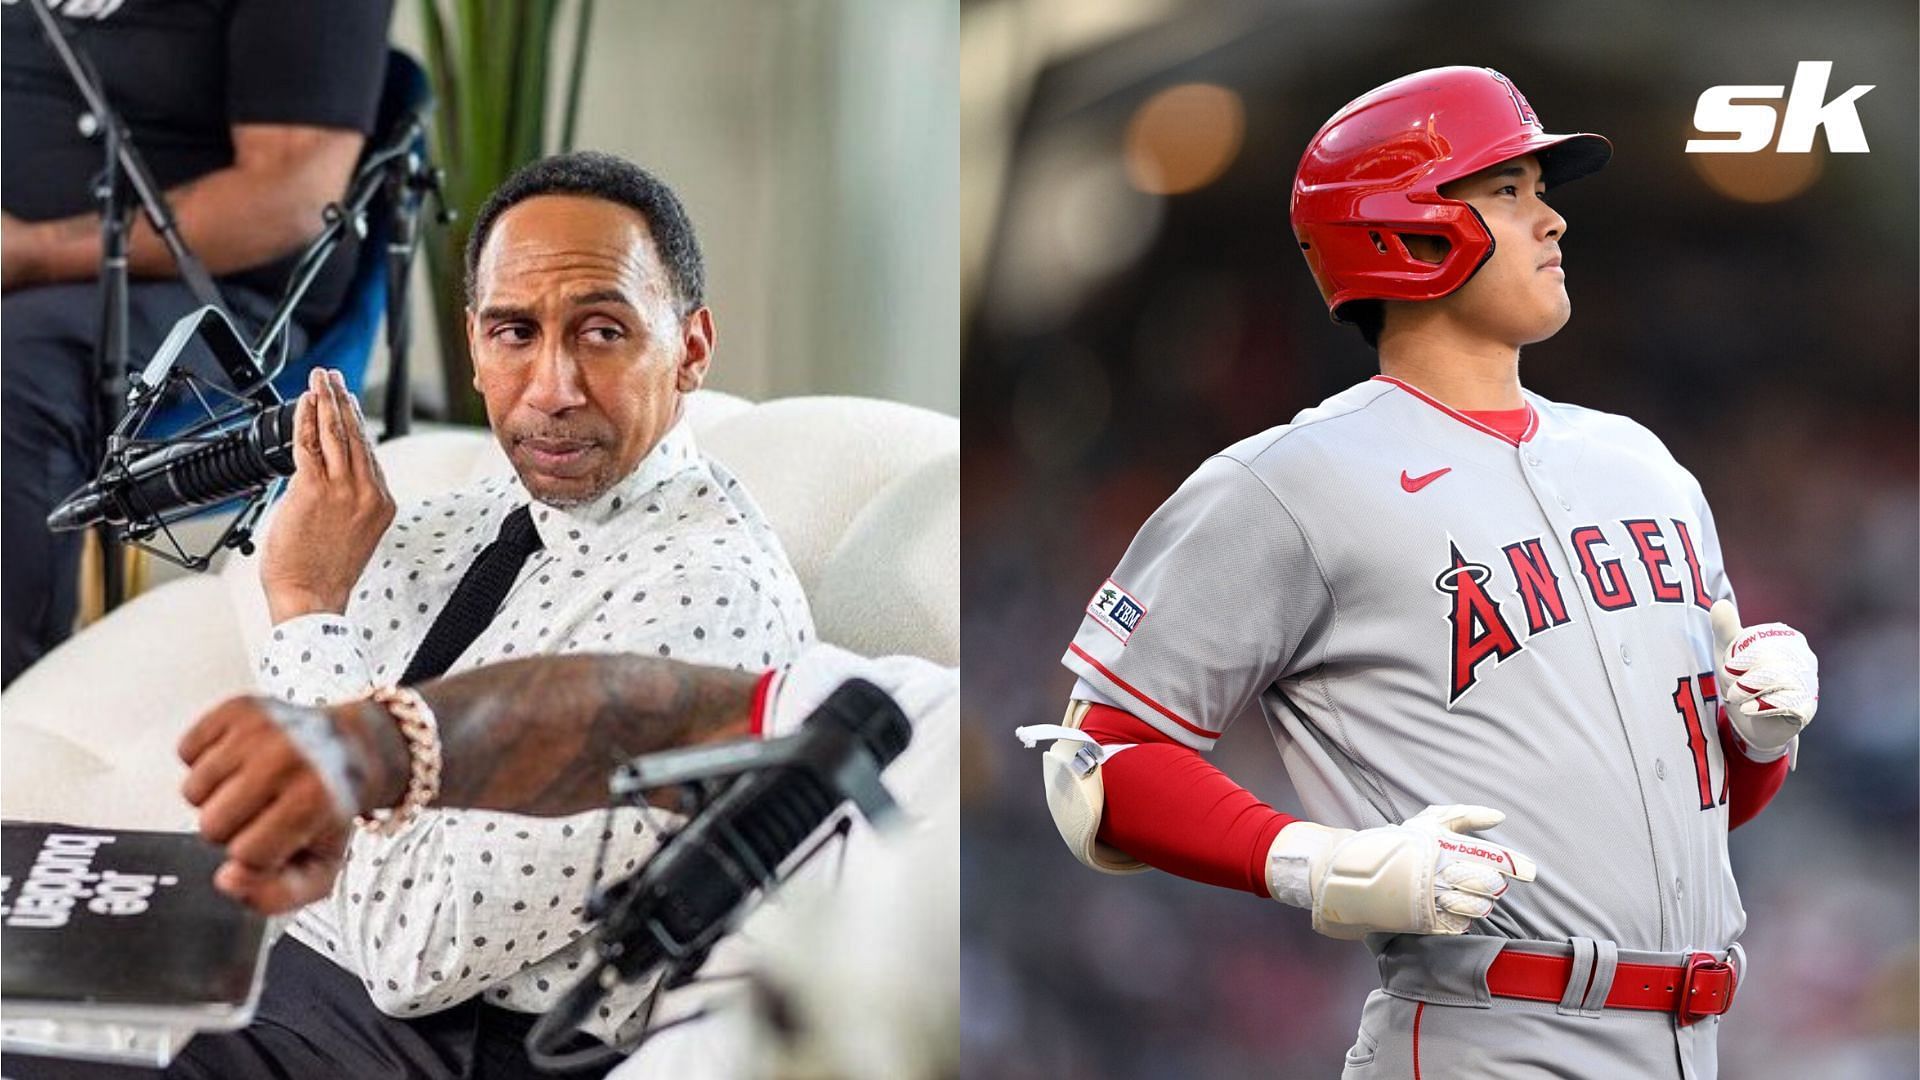 Stephen A. Smith has taken another shot at Shohei Ohtani, saying he is not worth his rumor massive contract this offseason